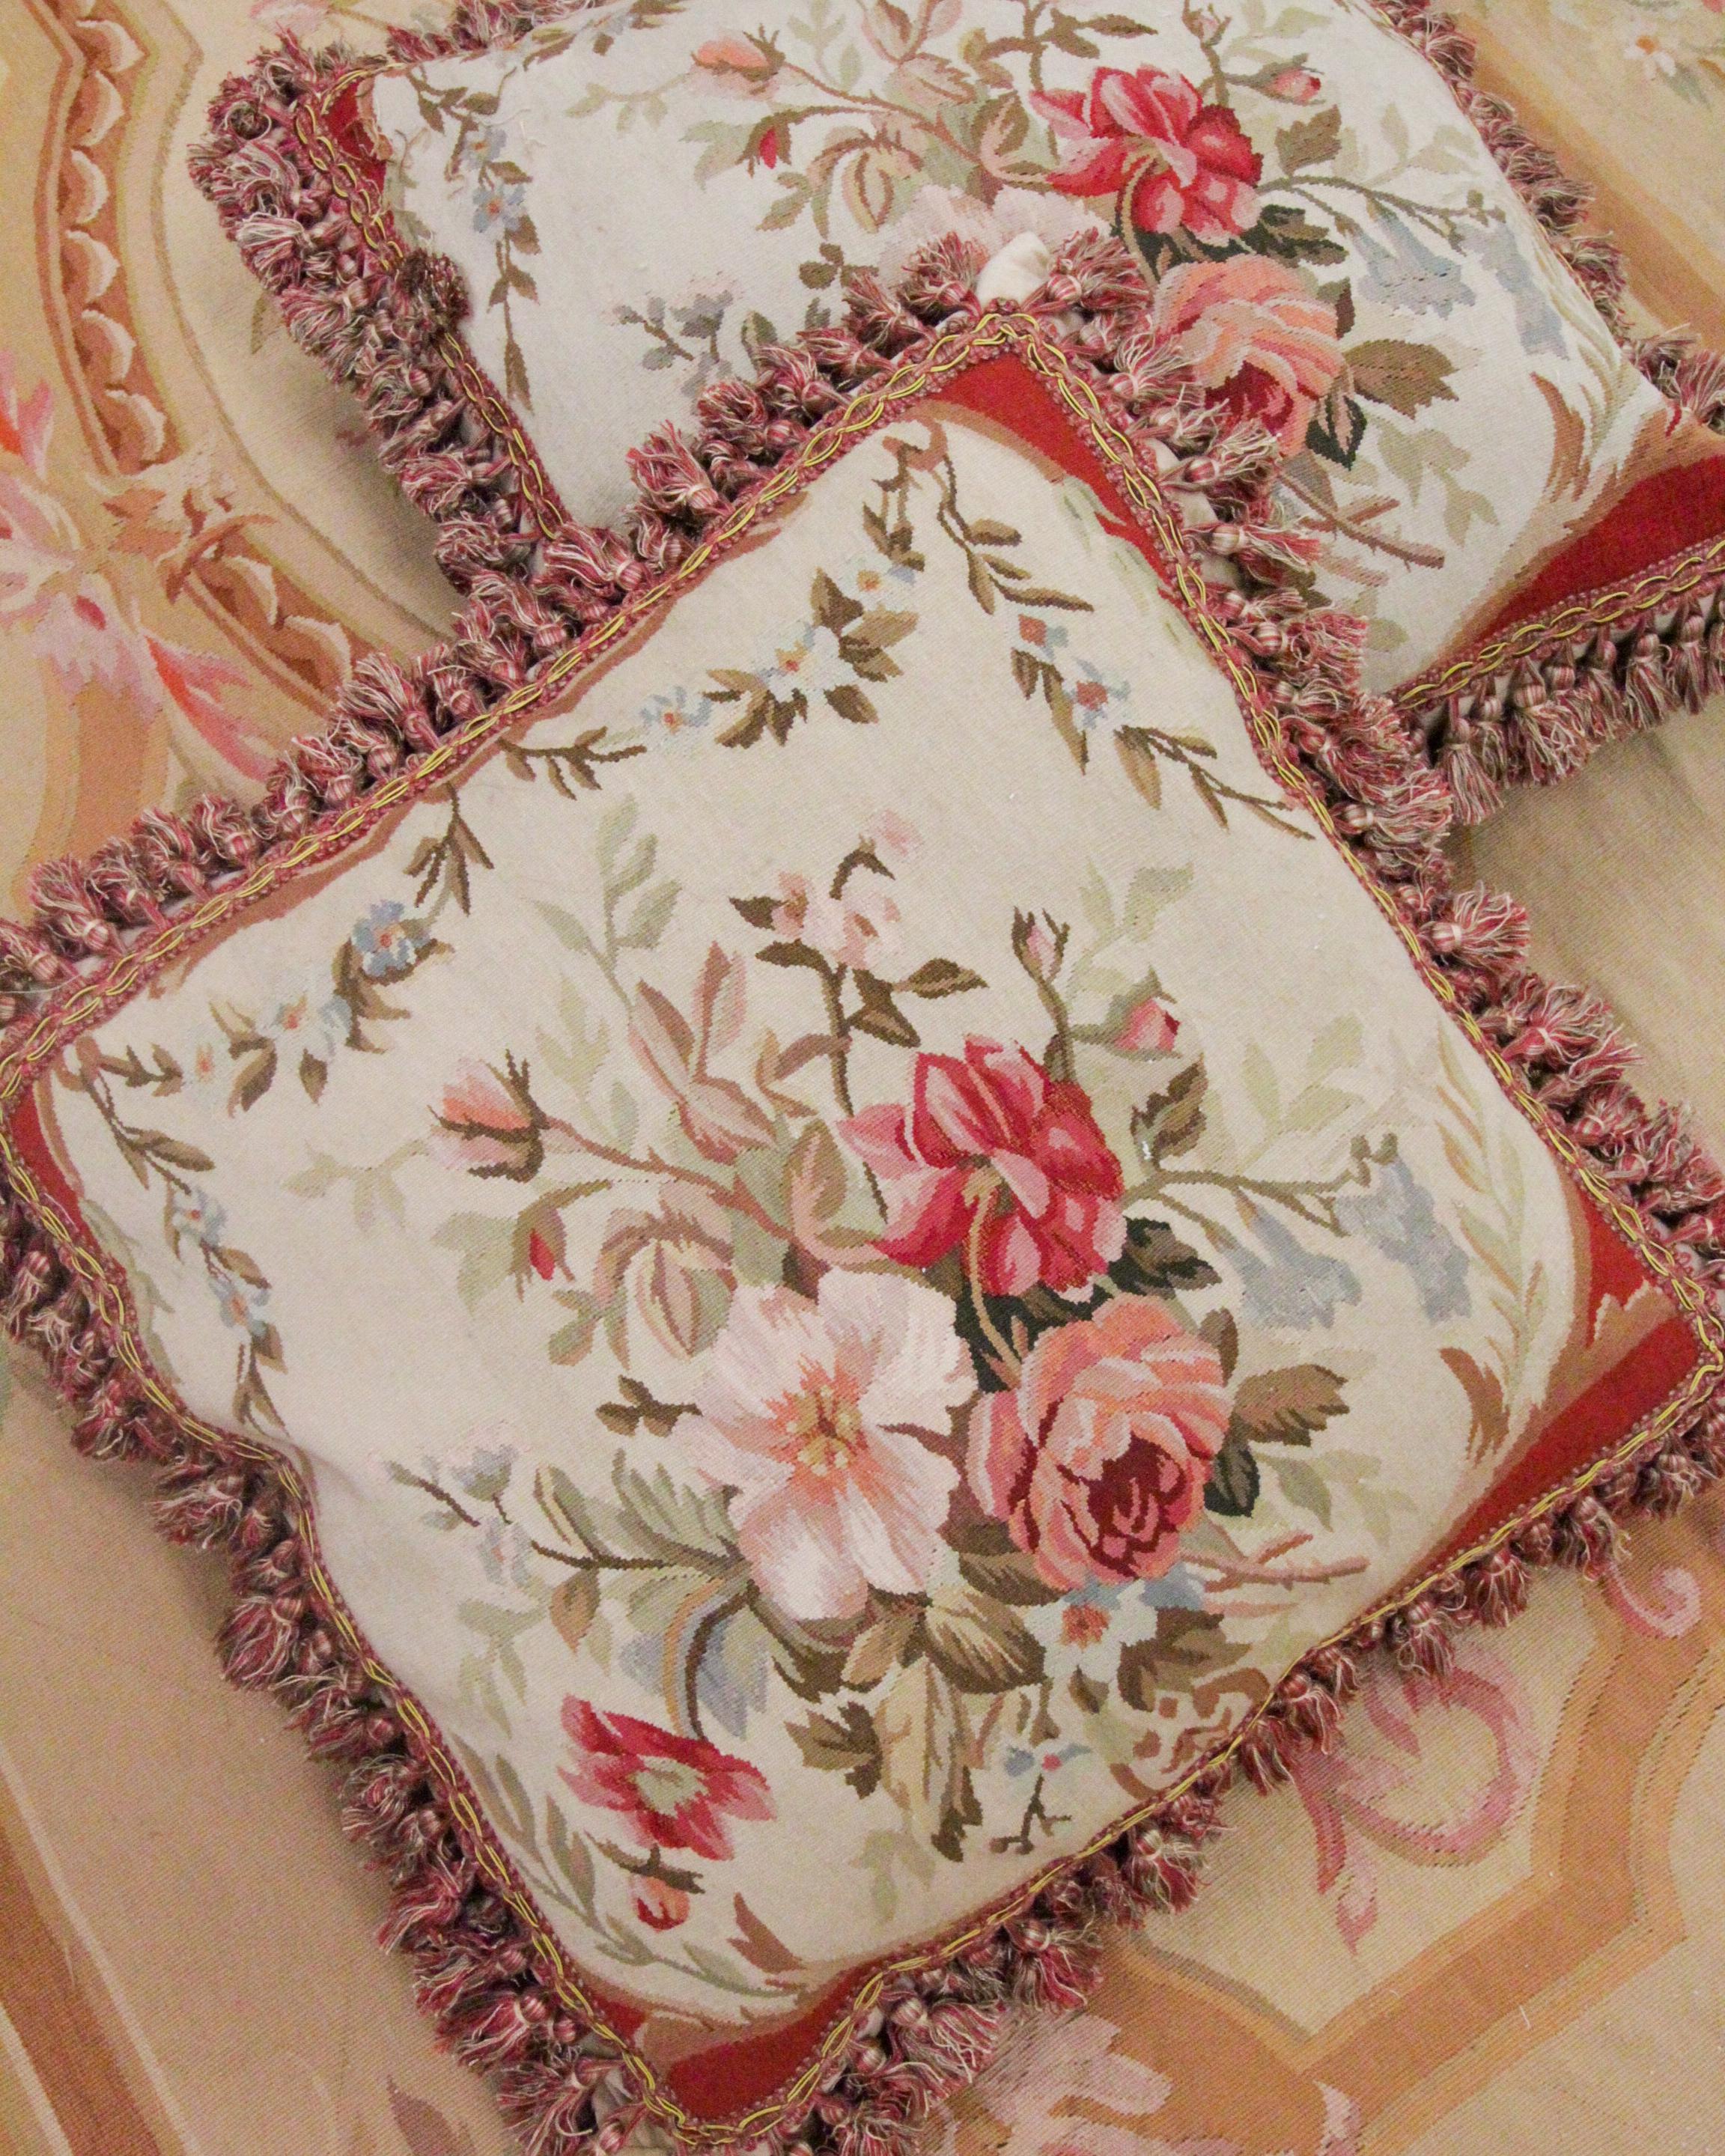 Hand-Crafted Handmade Cushion Cover Vintage Aubusson Traditional Wool Pillow Case